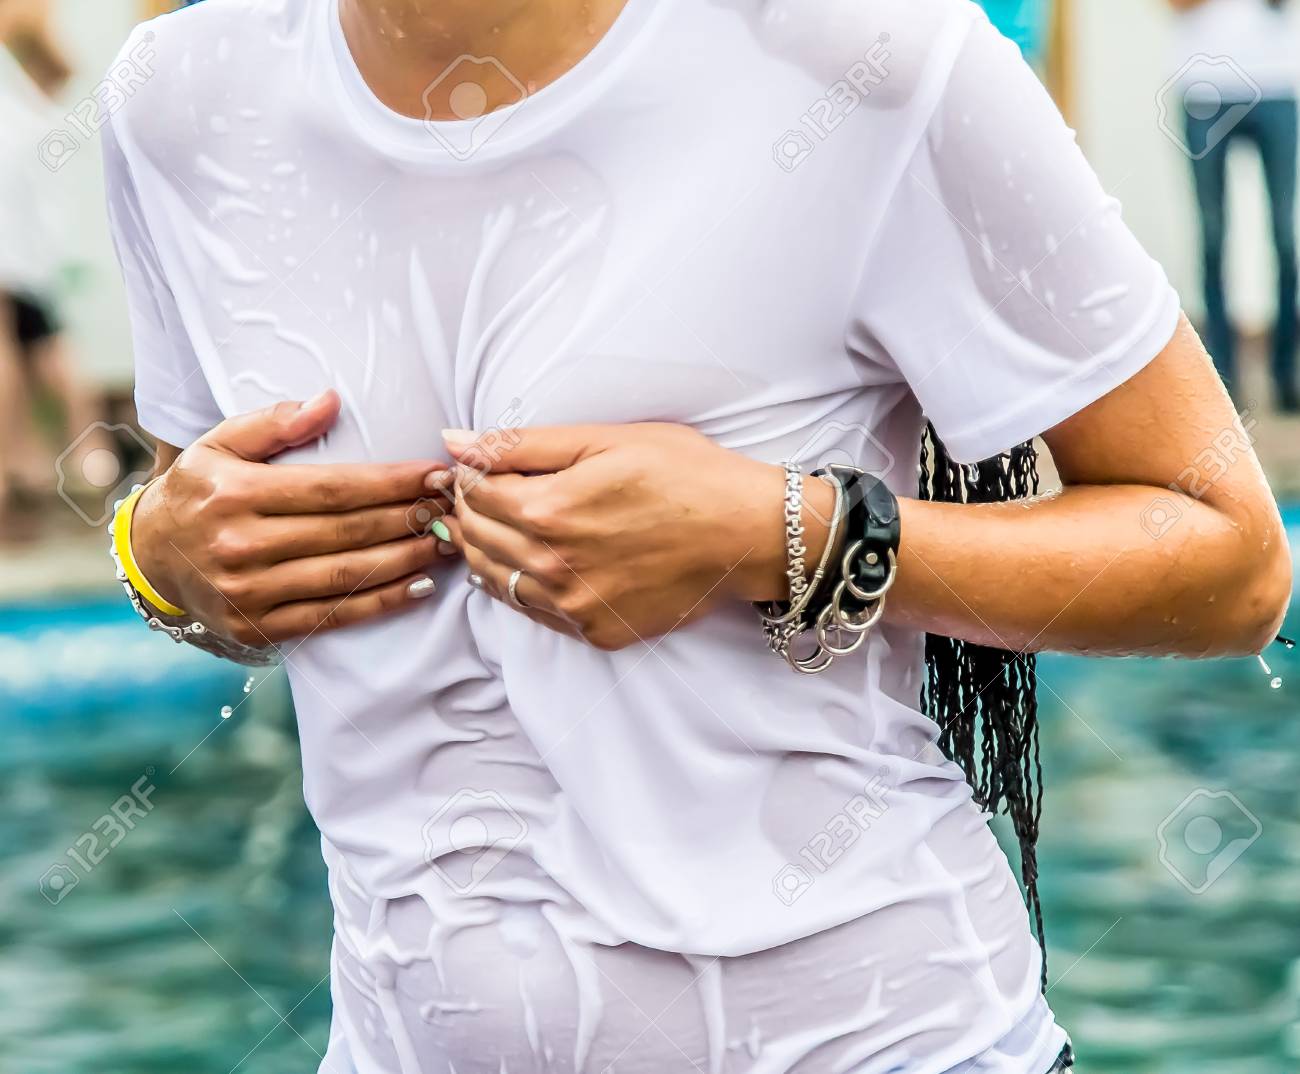 chloe asuncion recommends Wet Tee Shirt Images